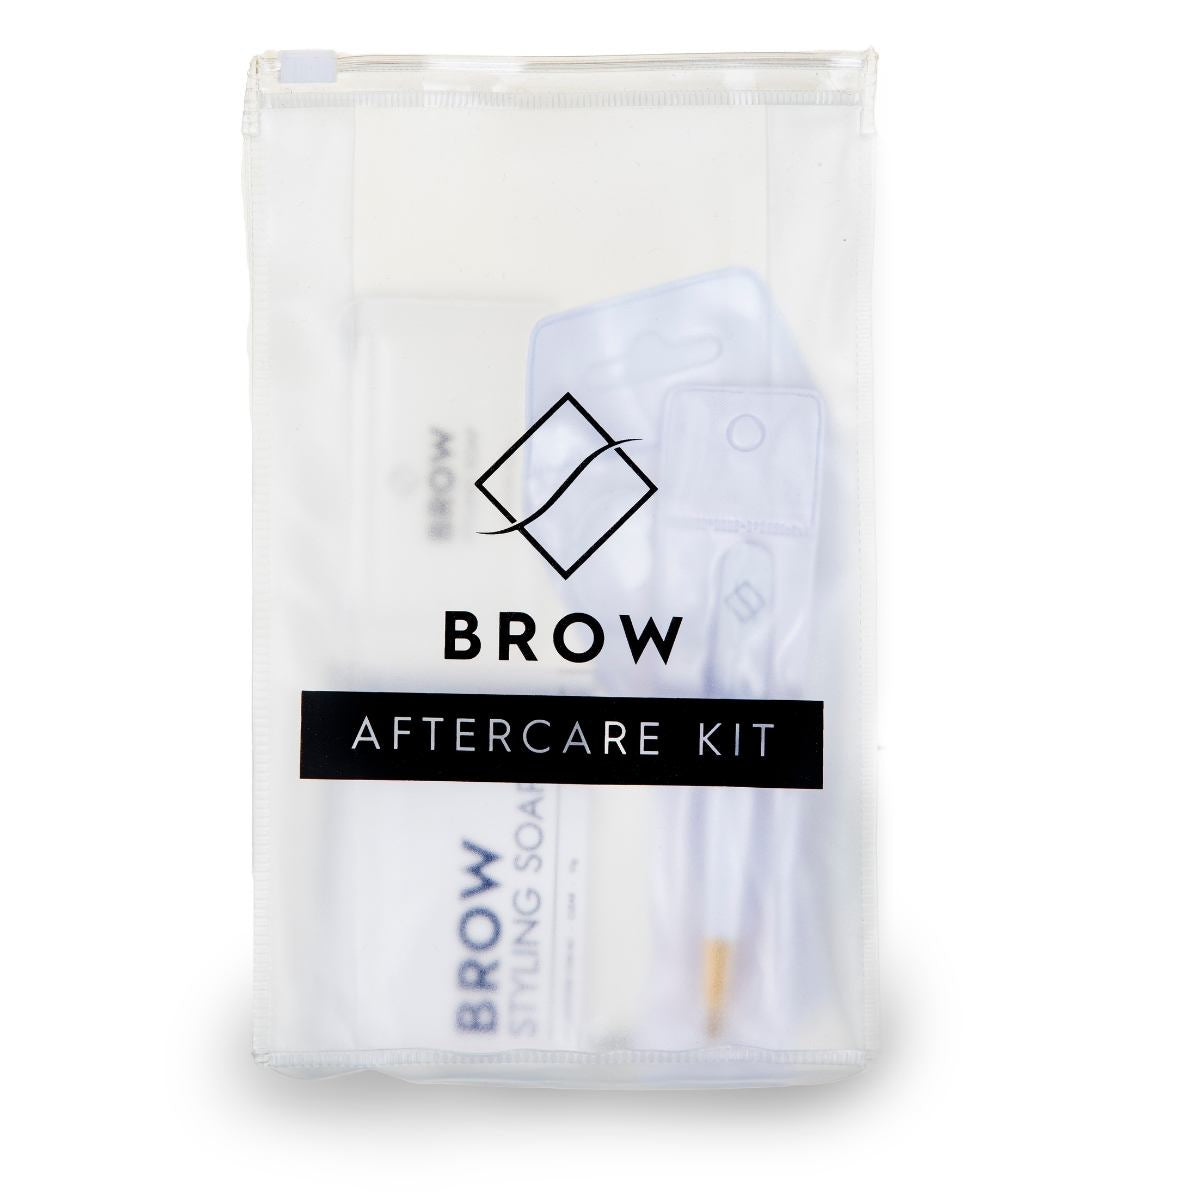 My Lash Store Brow Aftercare Kit